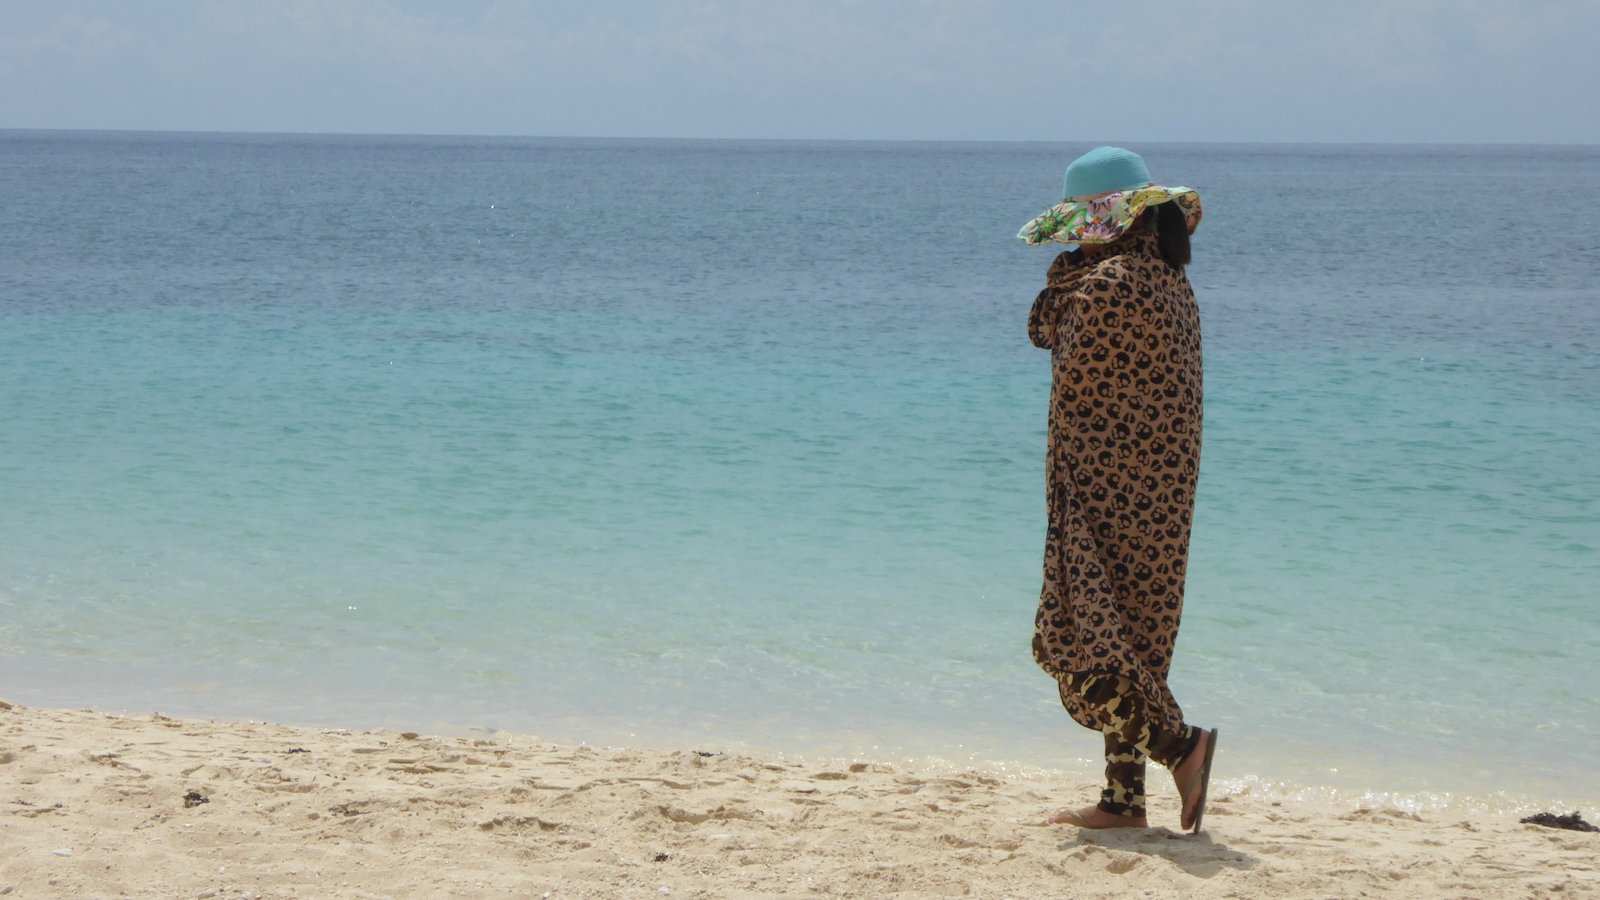 In Vietnam white skin is prized, so it's common to see women all covered up on the beach to avoid getting a tan!